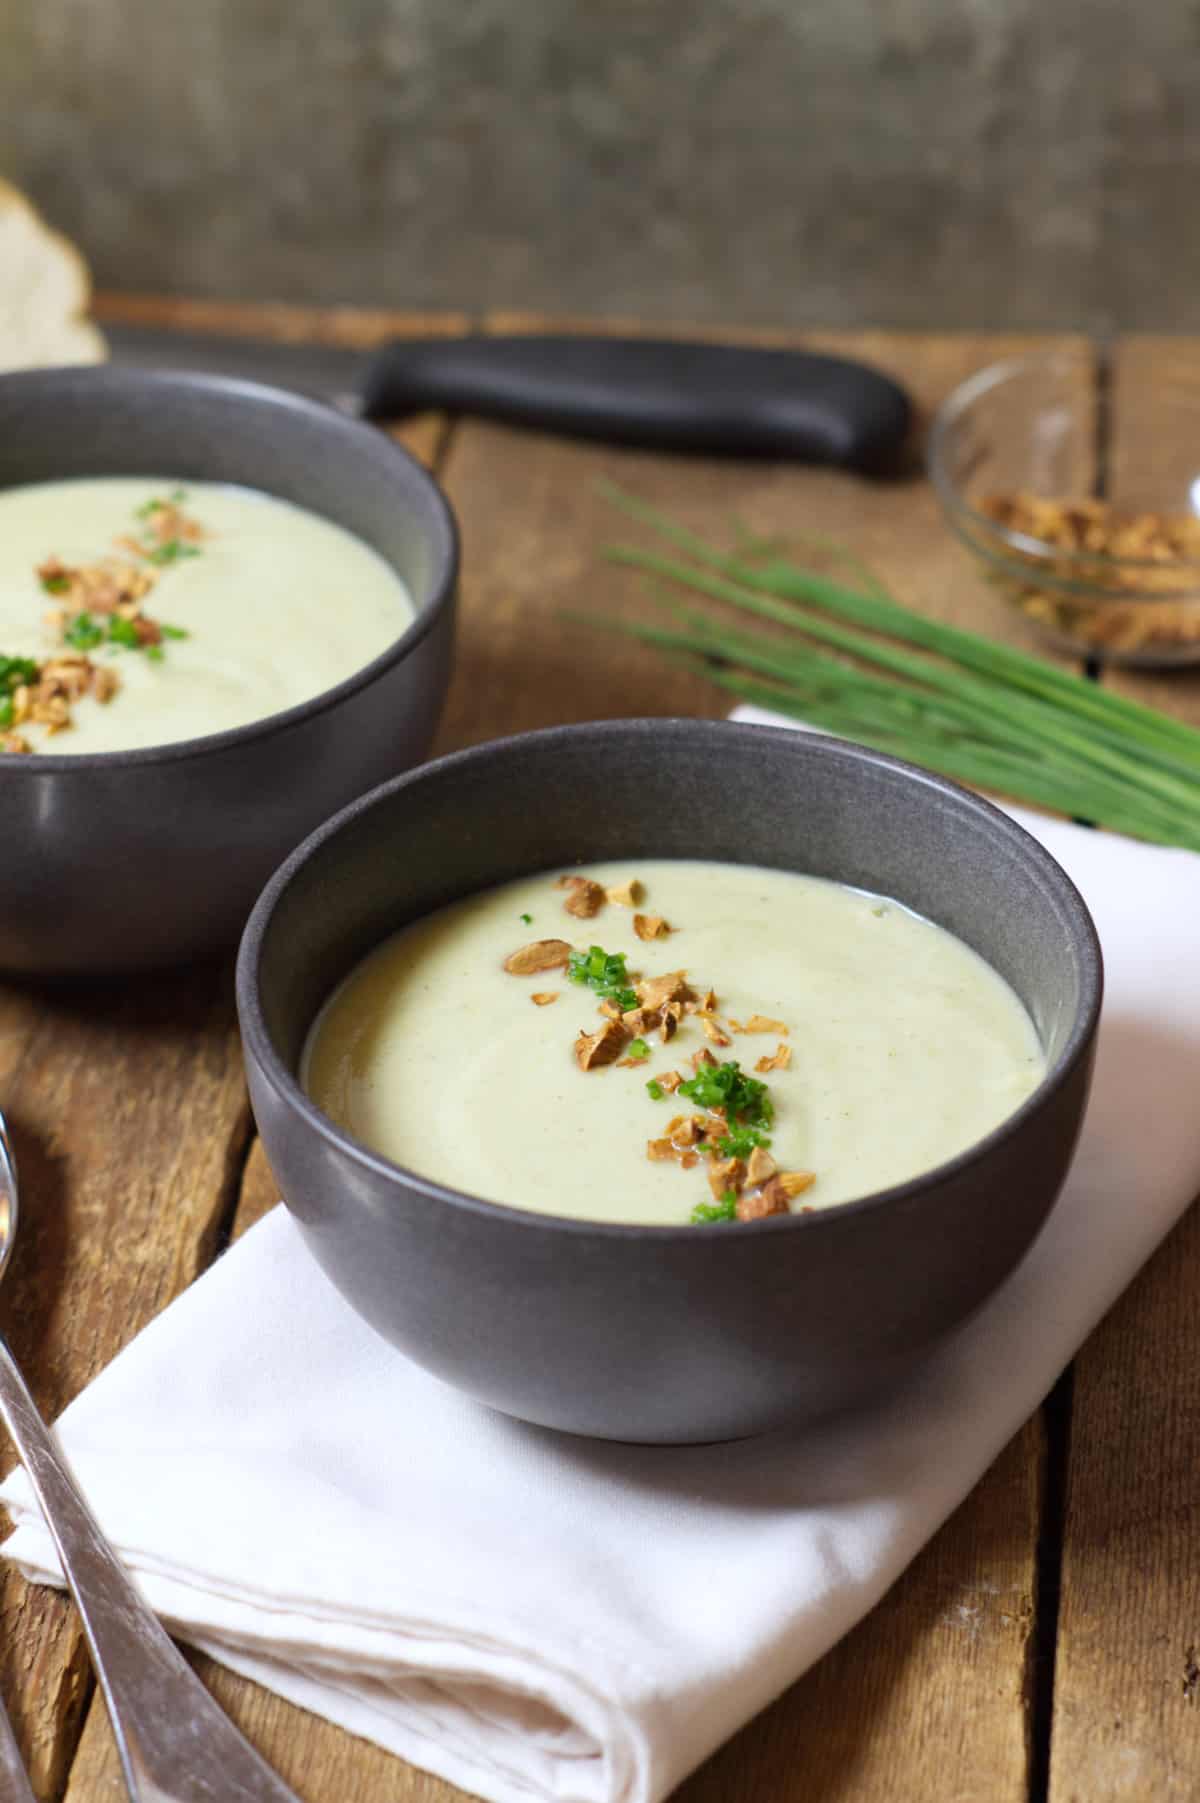 Vertical image of a close up of black stoneware soup bowls filled with pale green broccoli and cauliflower soup and garnished with toasted almonds and chopped chives.